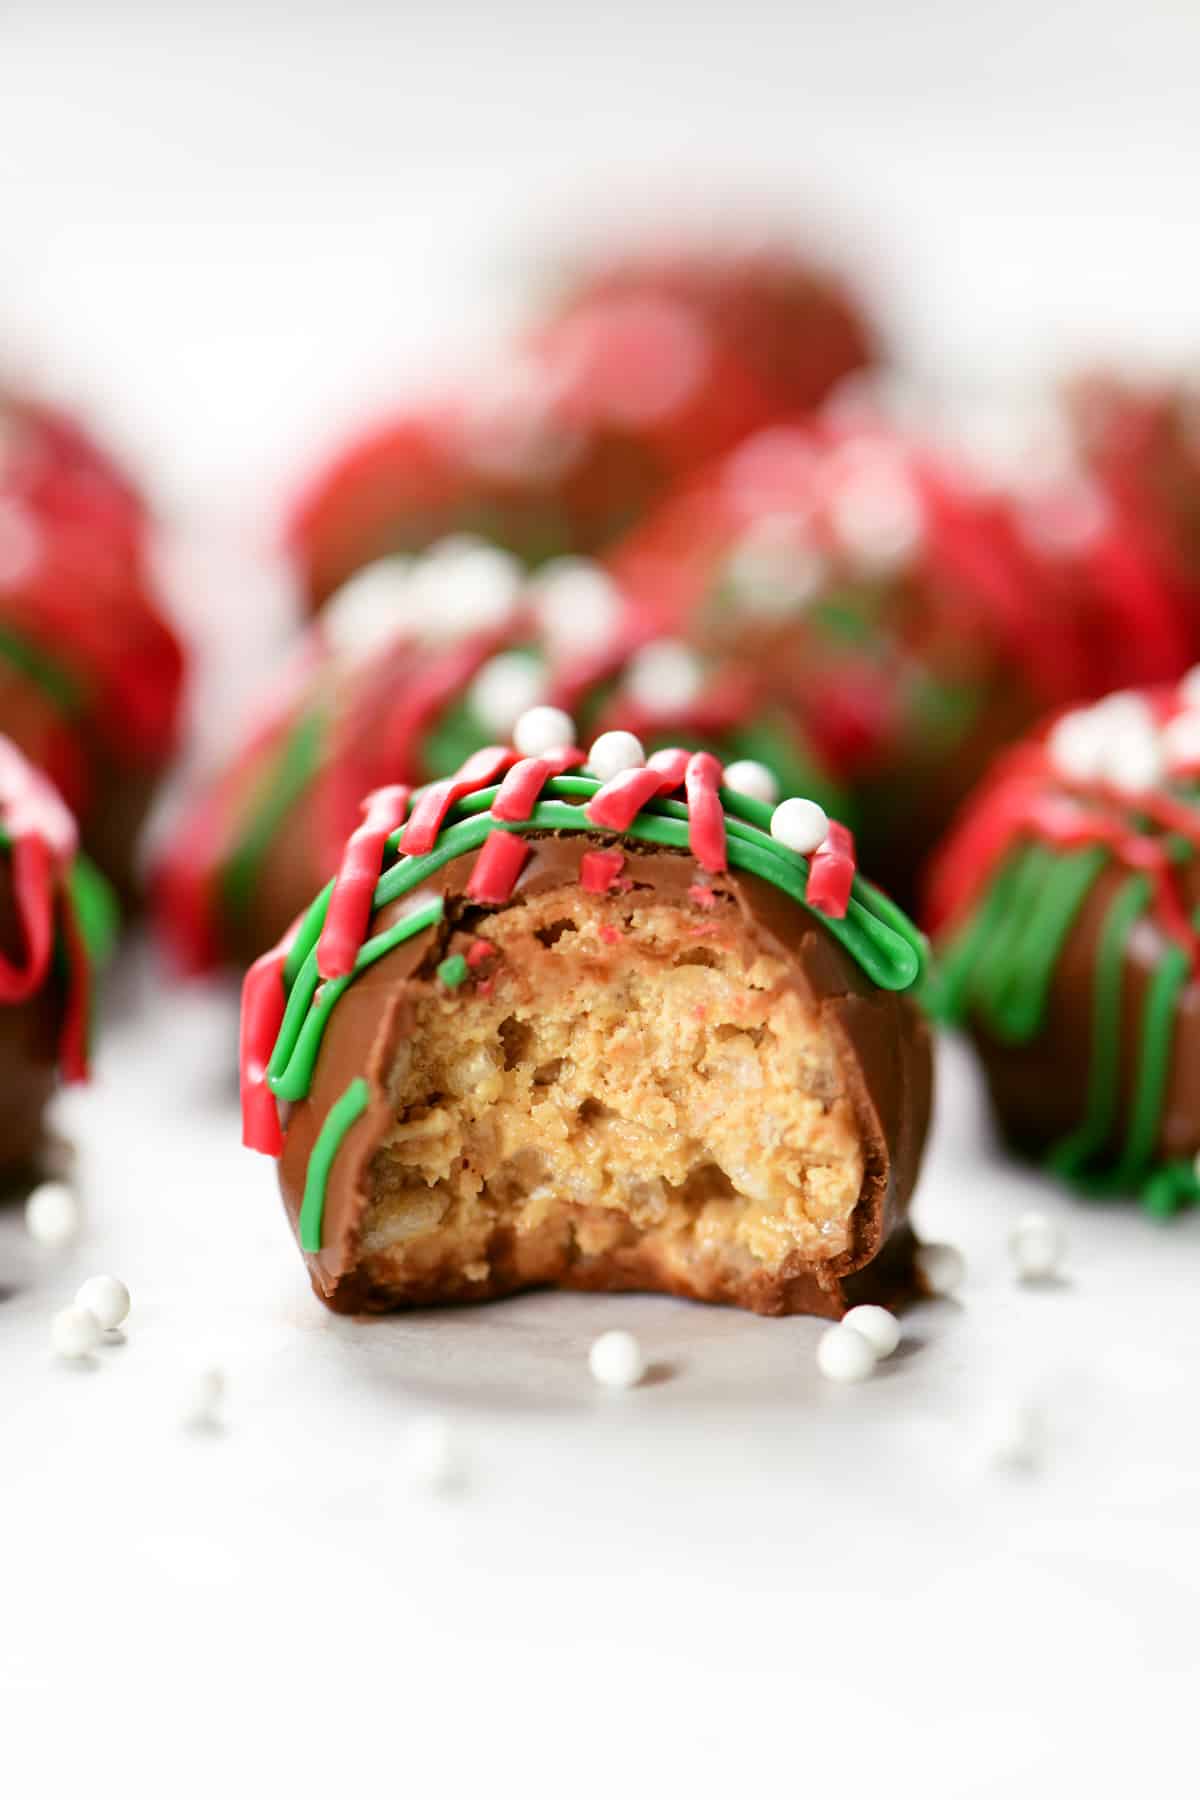 no bake peanut butter ball with a bite removed.